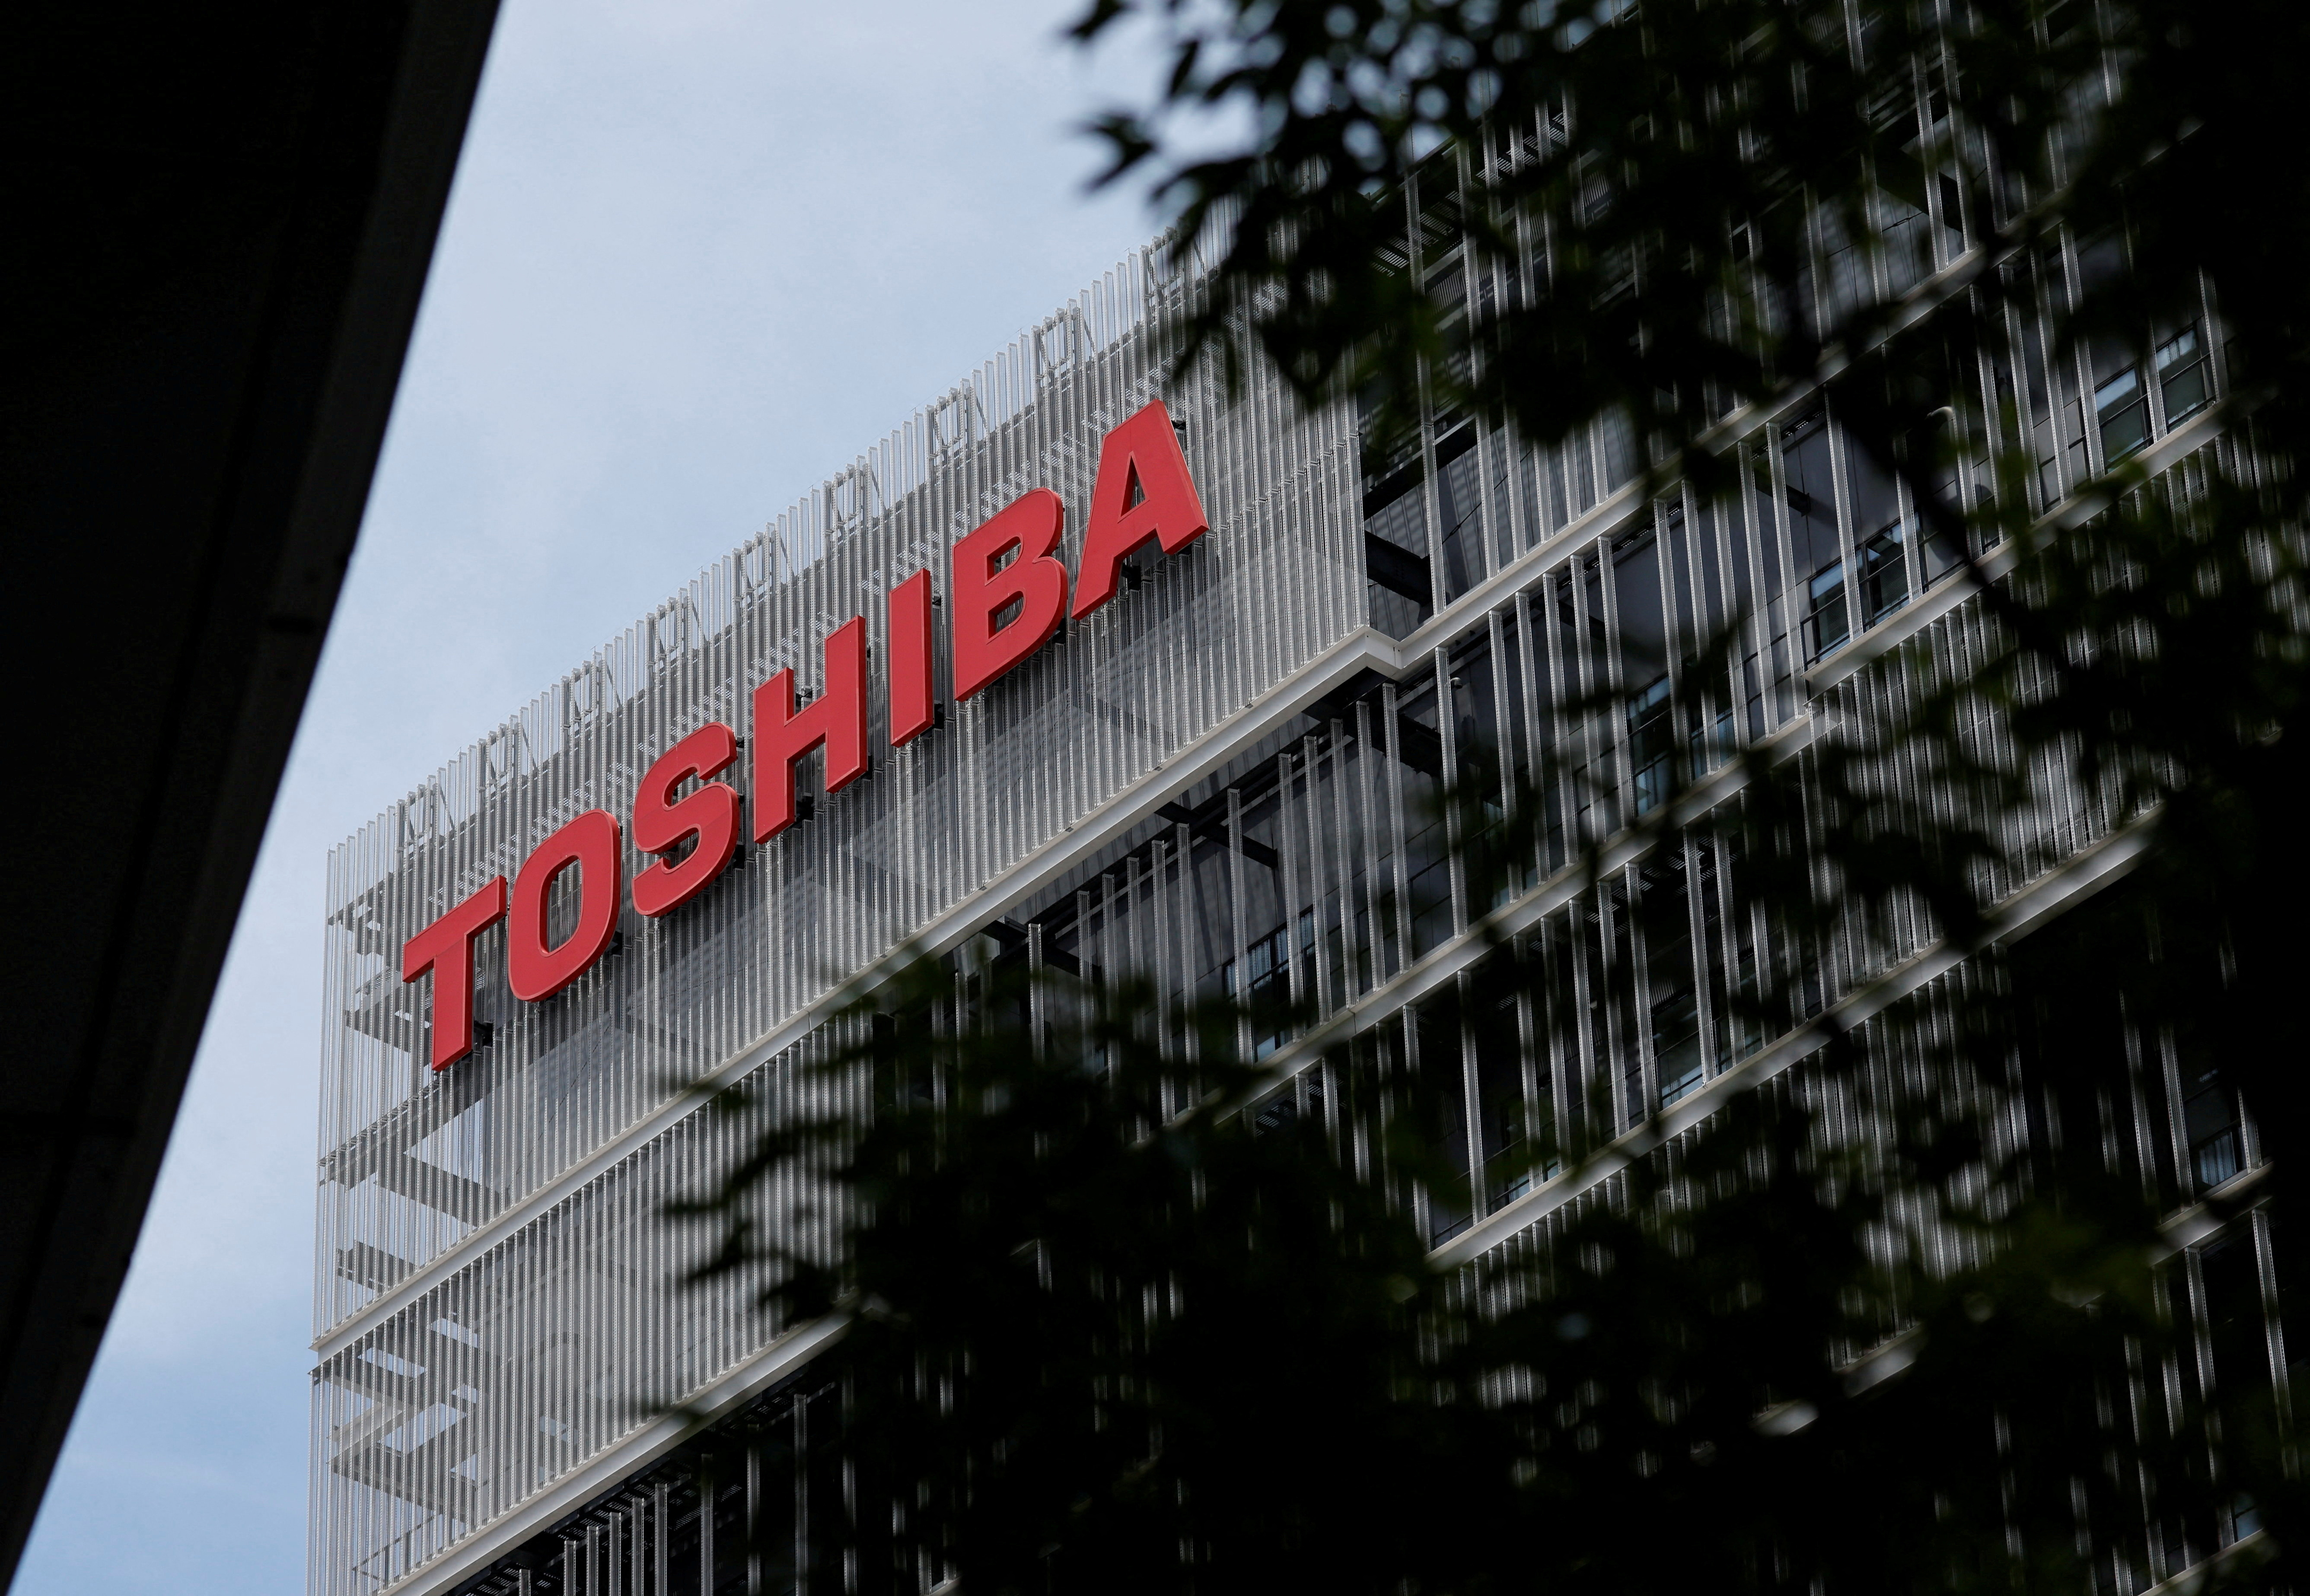 The logo of Toshiba Corp is displayed atop of the company's facility building in Kawasaki, Japan